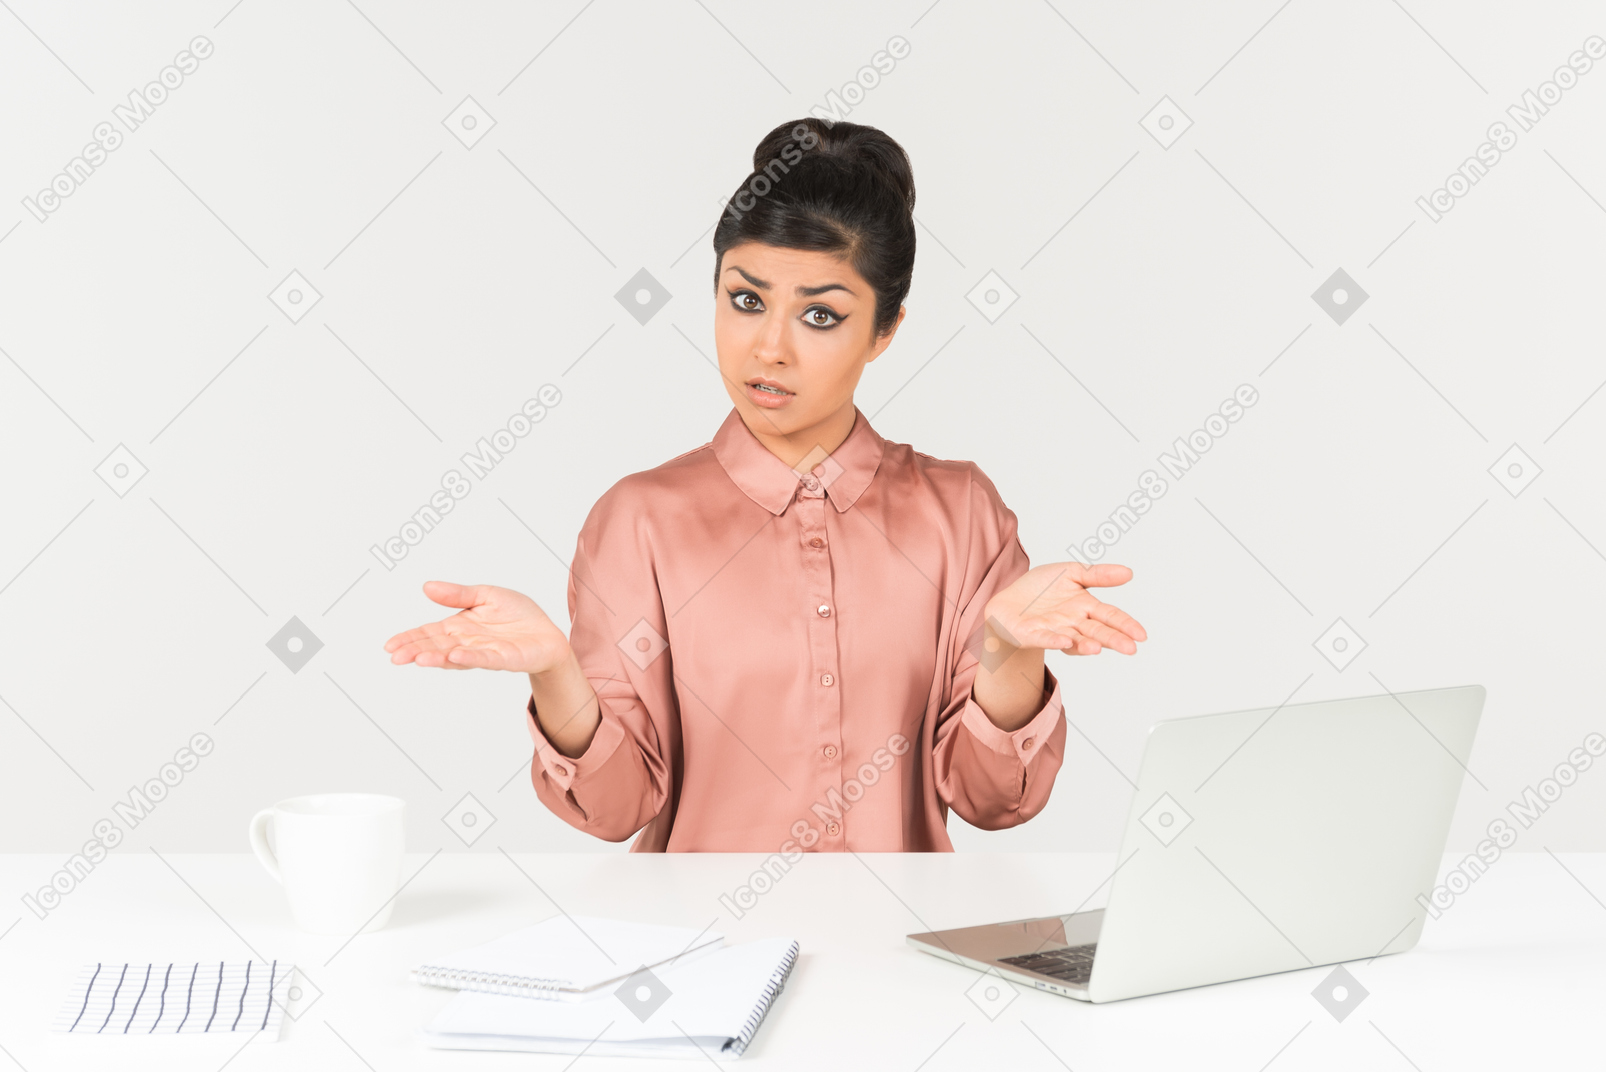 Not understanding something young indian woman sitting at the office desk